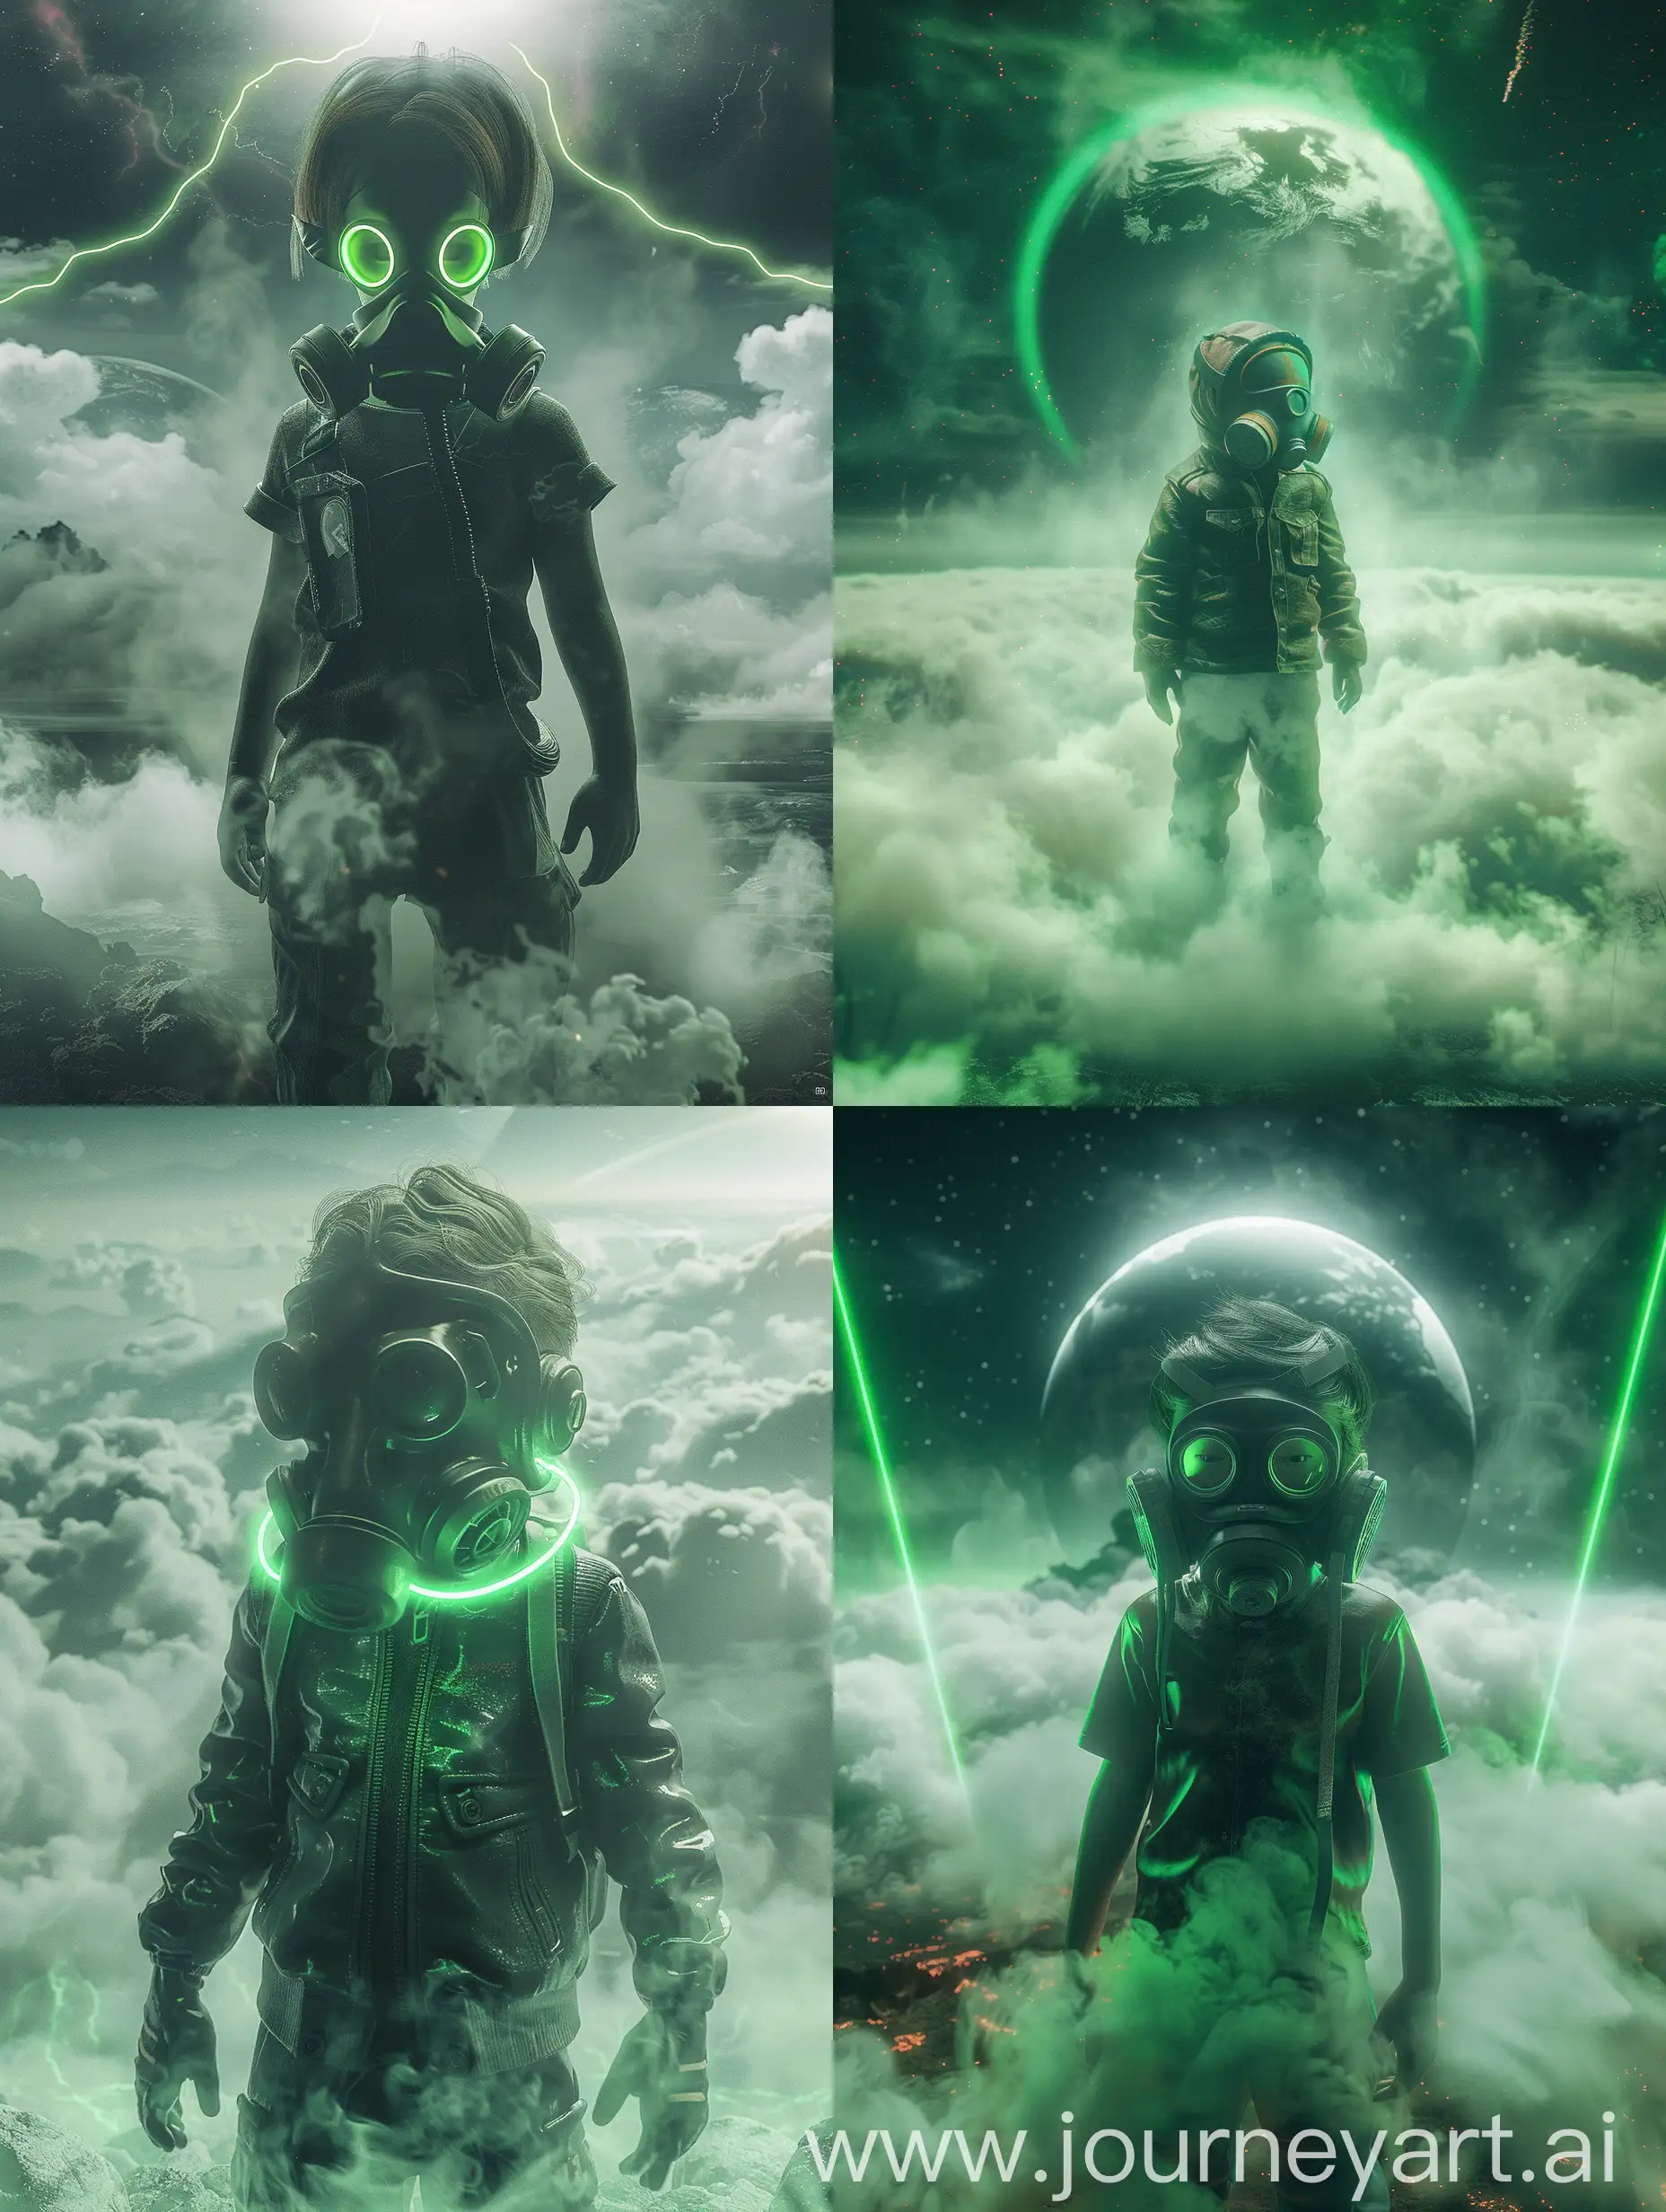 Child-in-Gas-Mask-Amid-Apocalyptic-Landscape-with-Neon-Fog